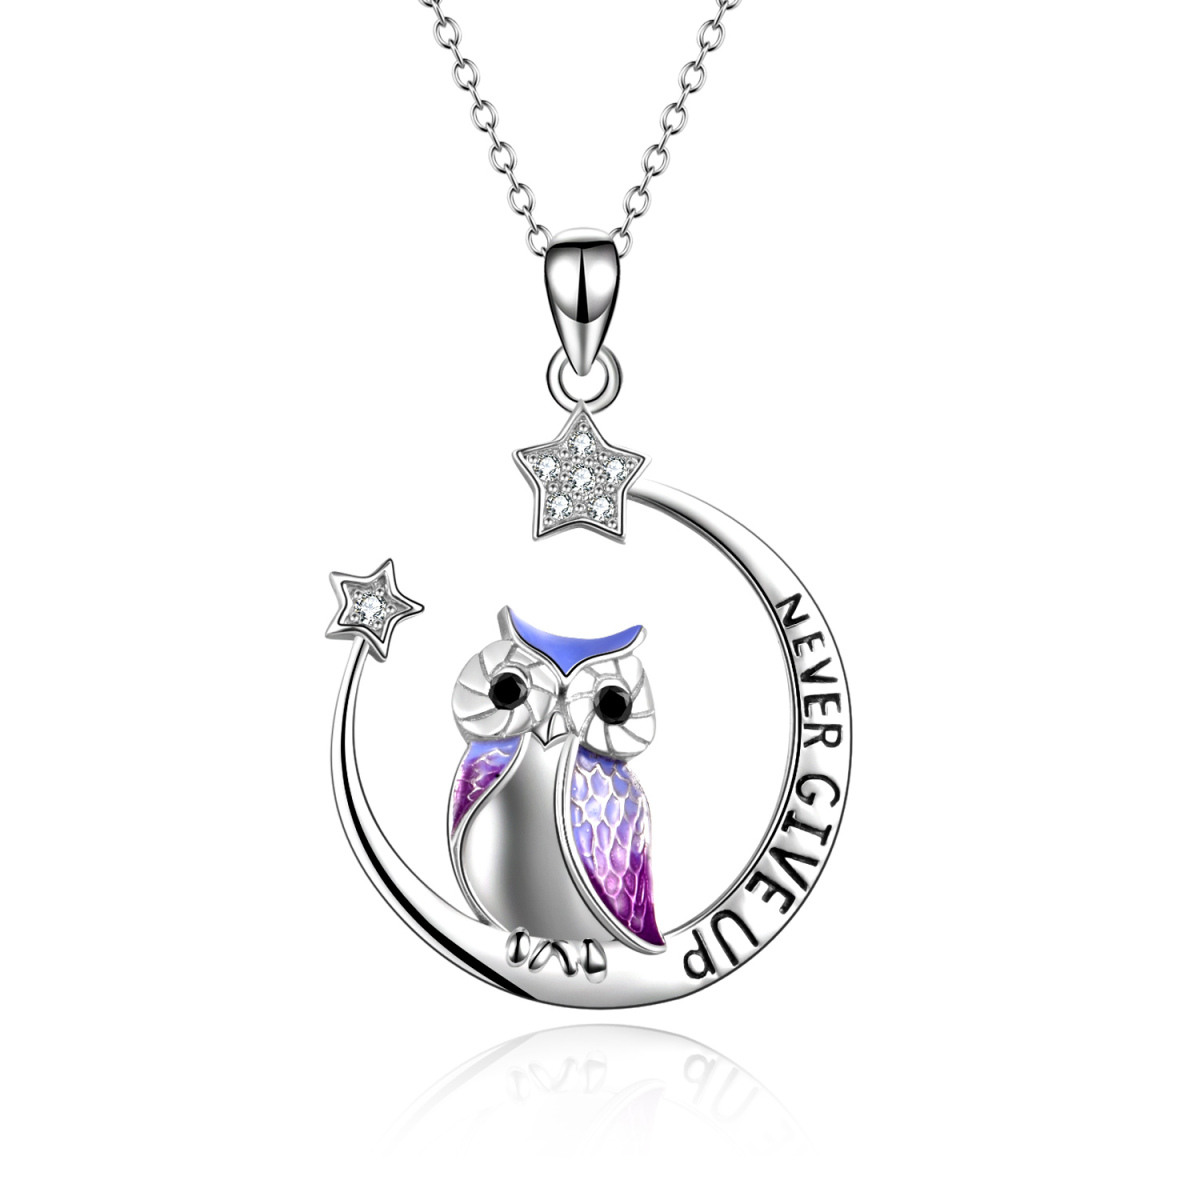 Sterling Silver Cubic Zirconia Owl & Moon Pendant Necklace with Engraved Word-1